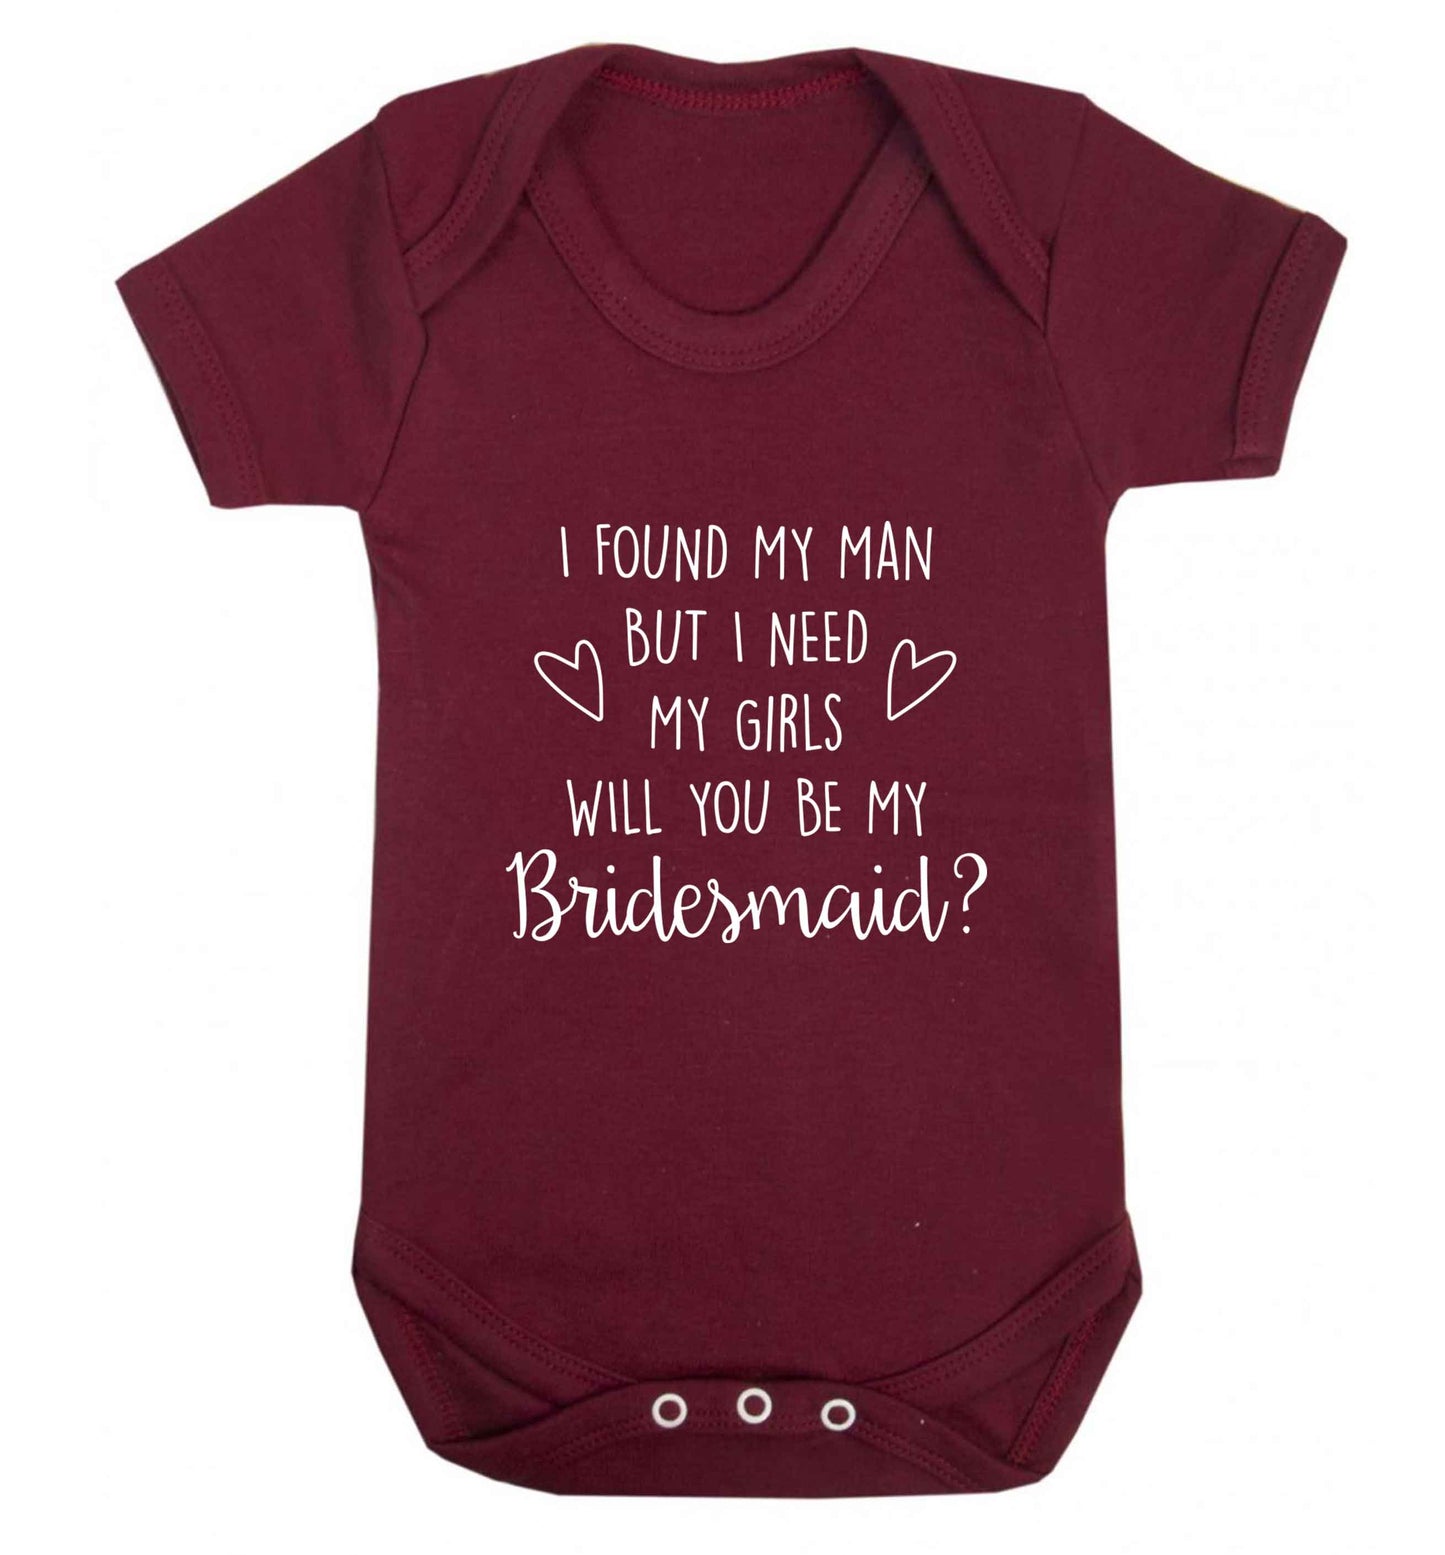 I found my man but I need my girls will you be my bridesmaid? baby vest maroon 18-24 months